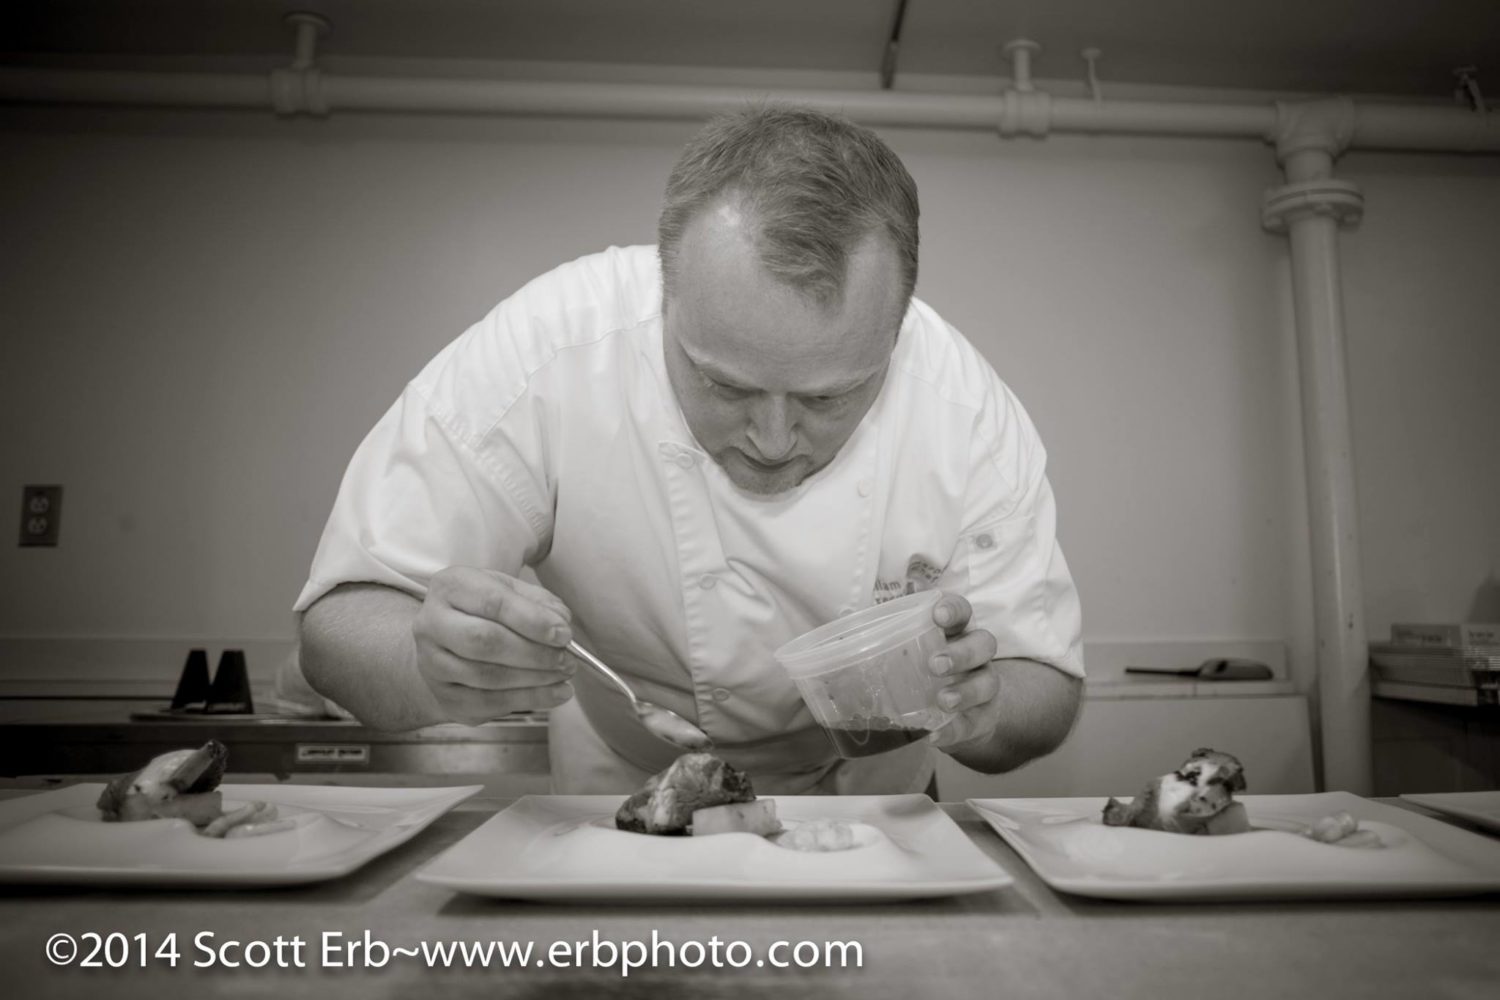 No restrictions; Introducing a new dinner series, Chef's Best: The Nemeroff Experience. Kicking it off at Old Sturbridge Village with Chef William Nemeroff. Limited number of tickets still available.